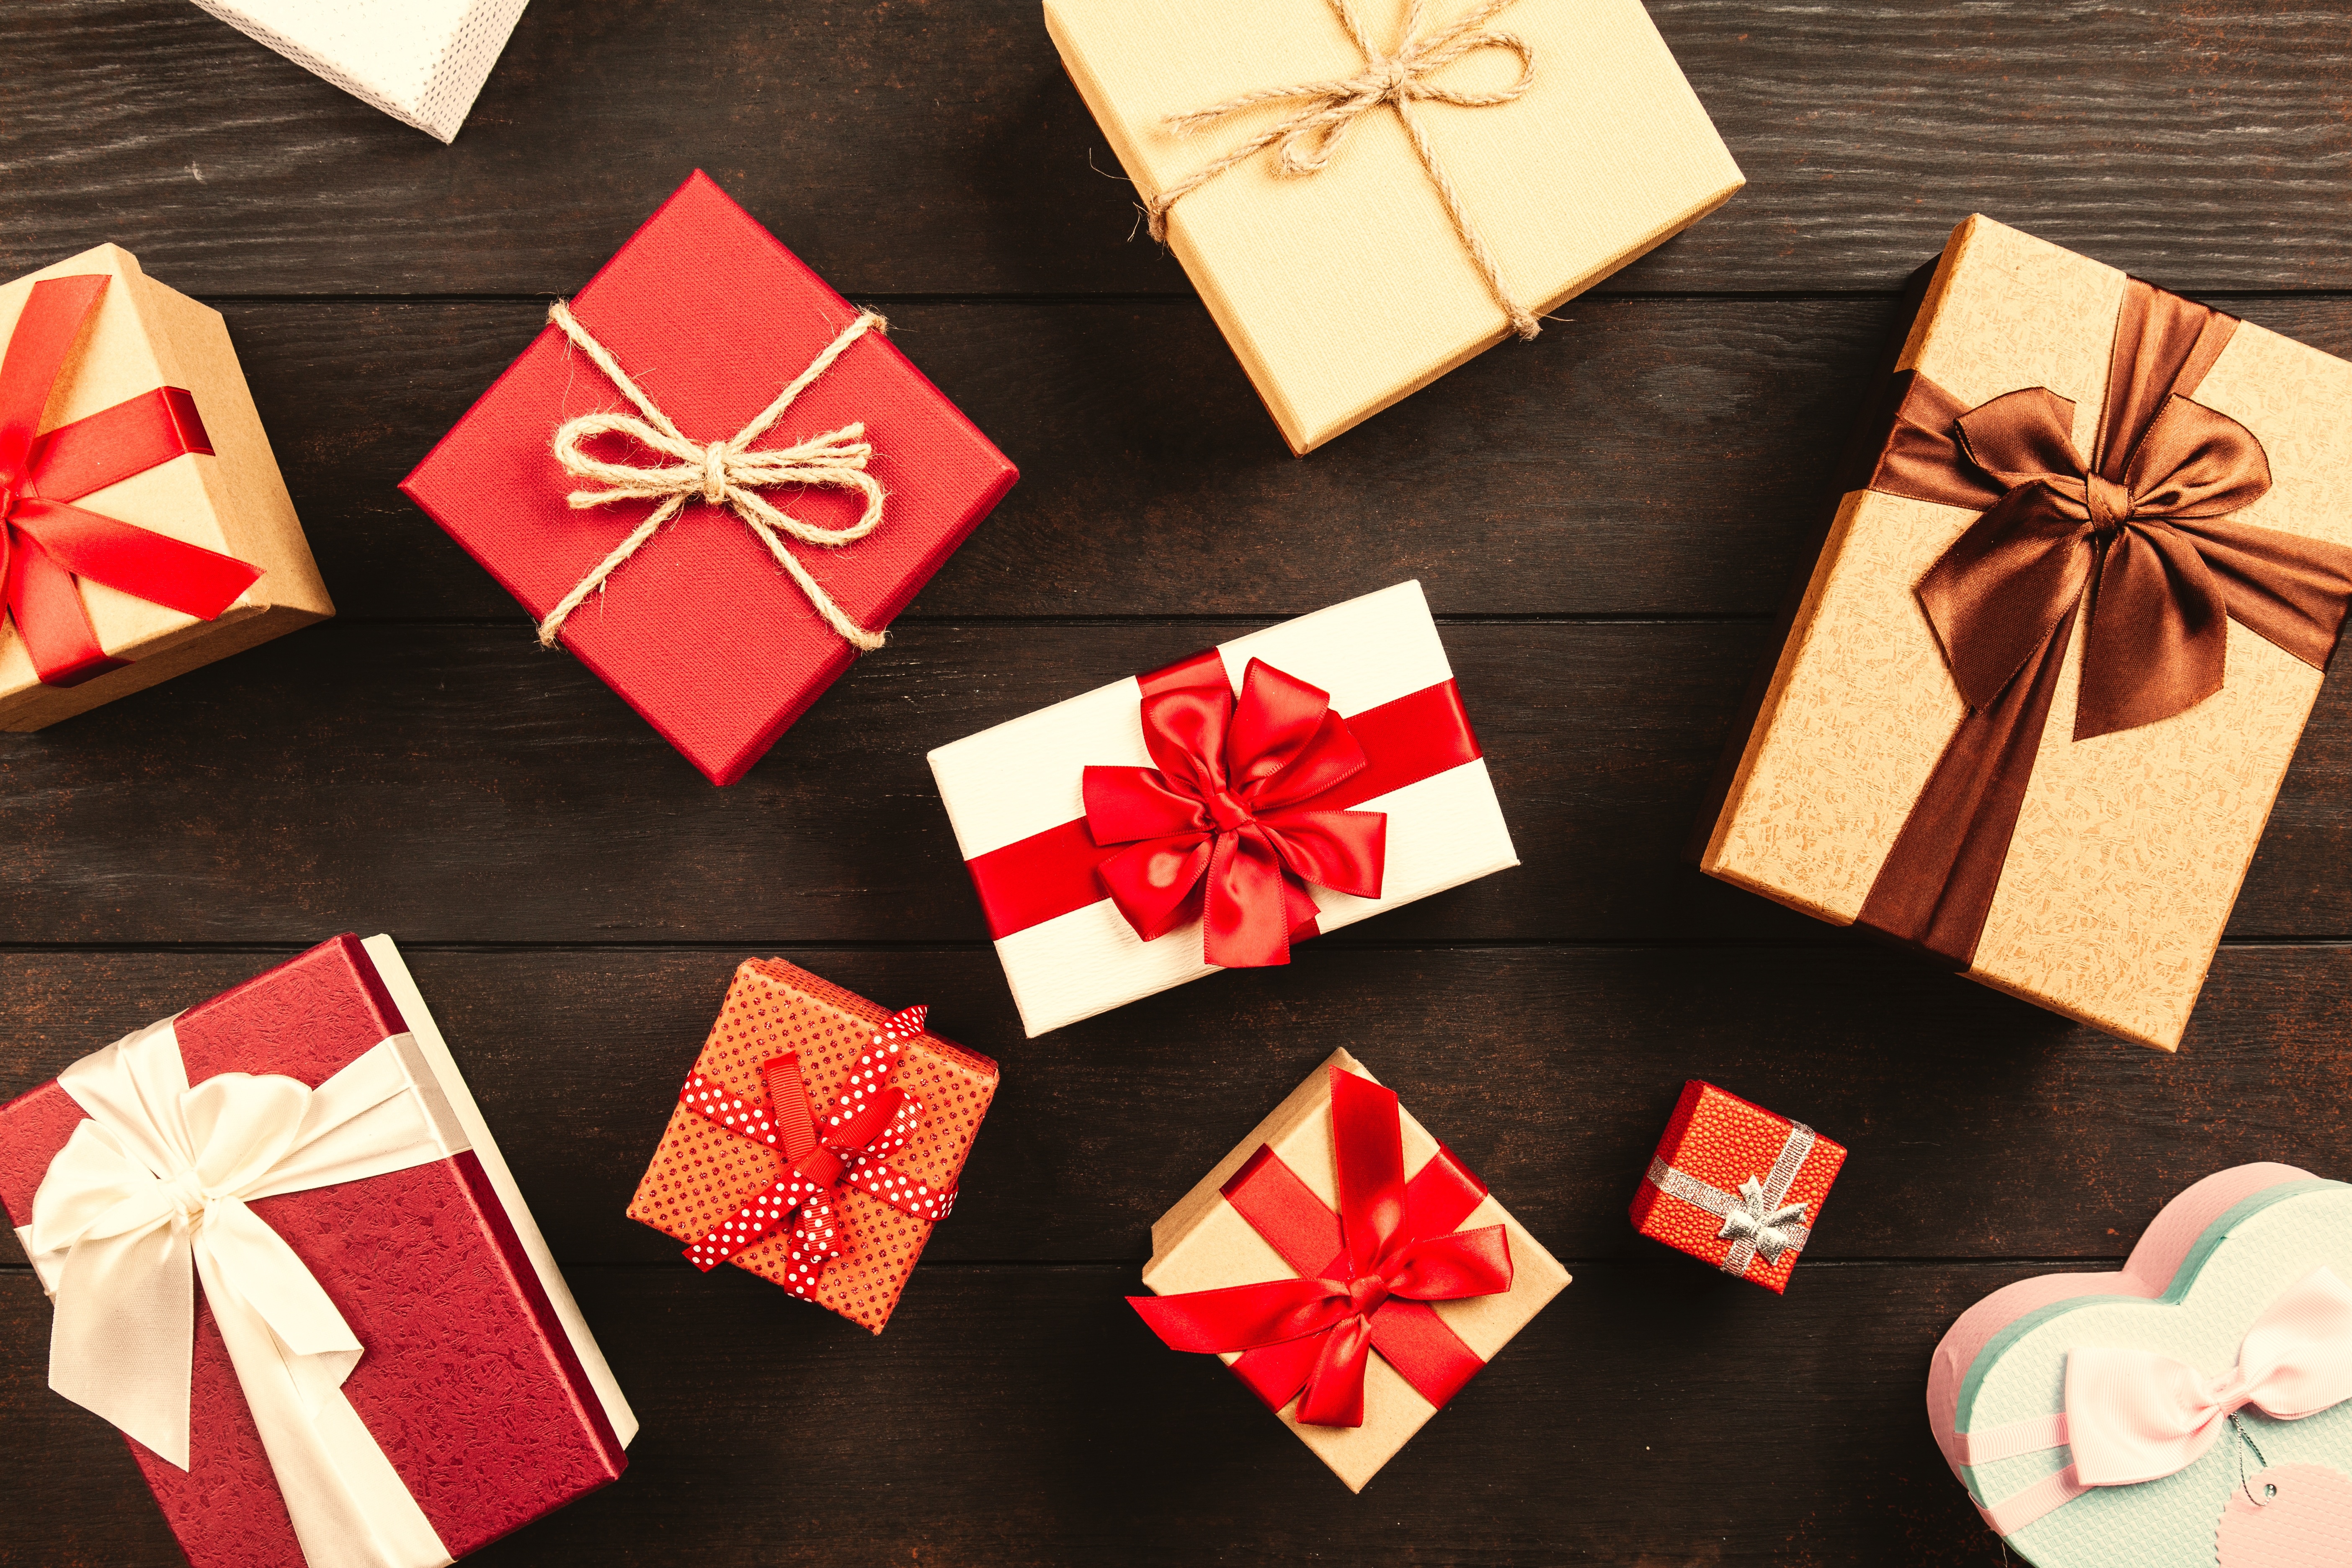 What are the benefits of gift boxes?